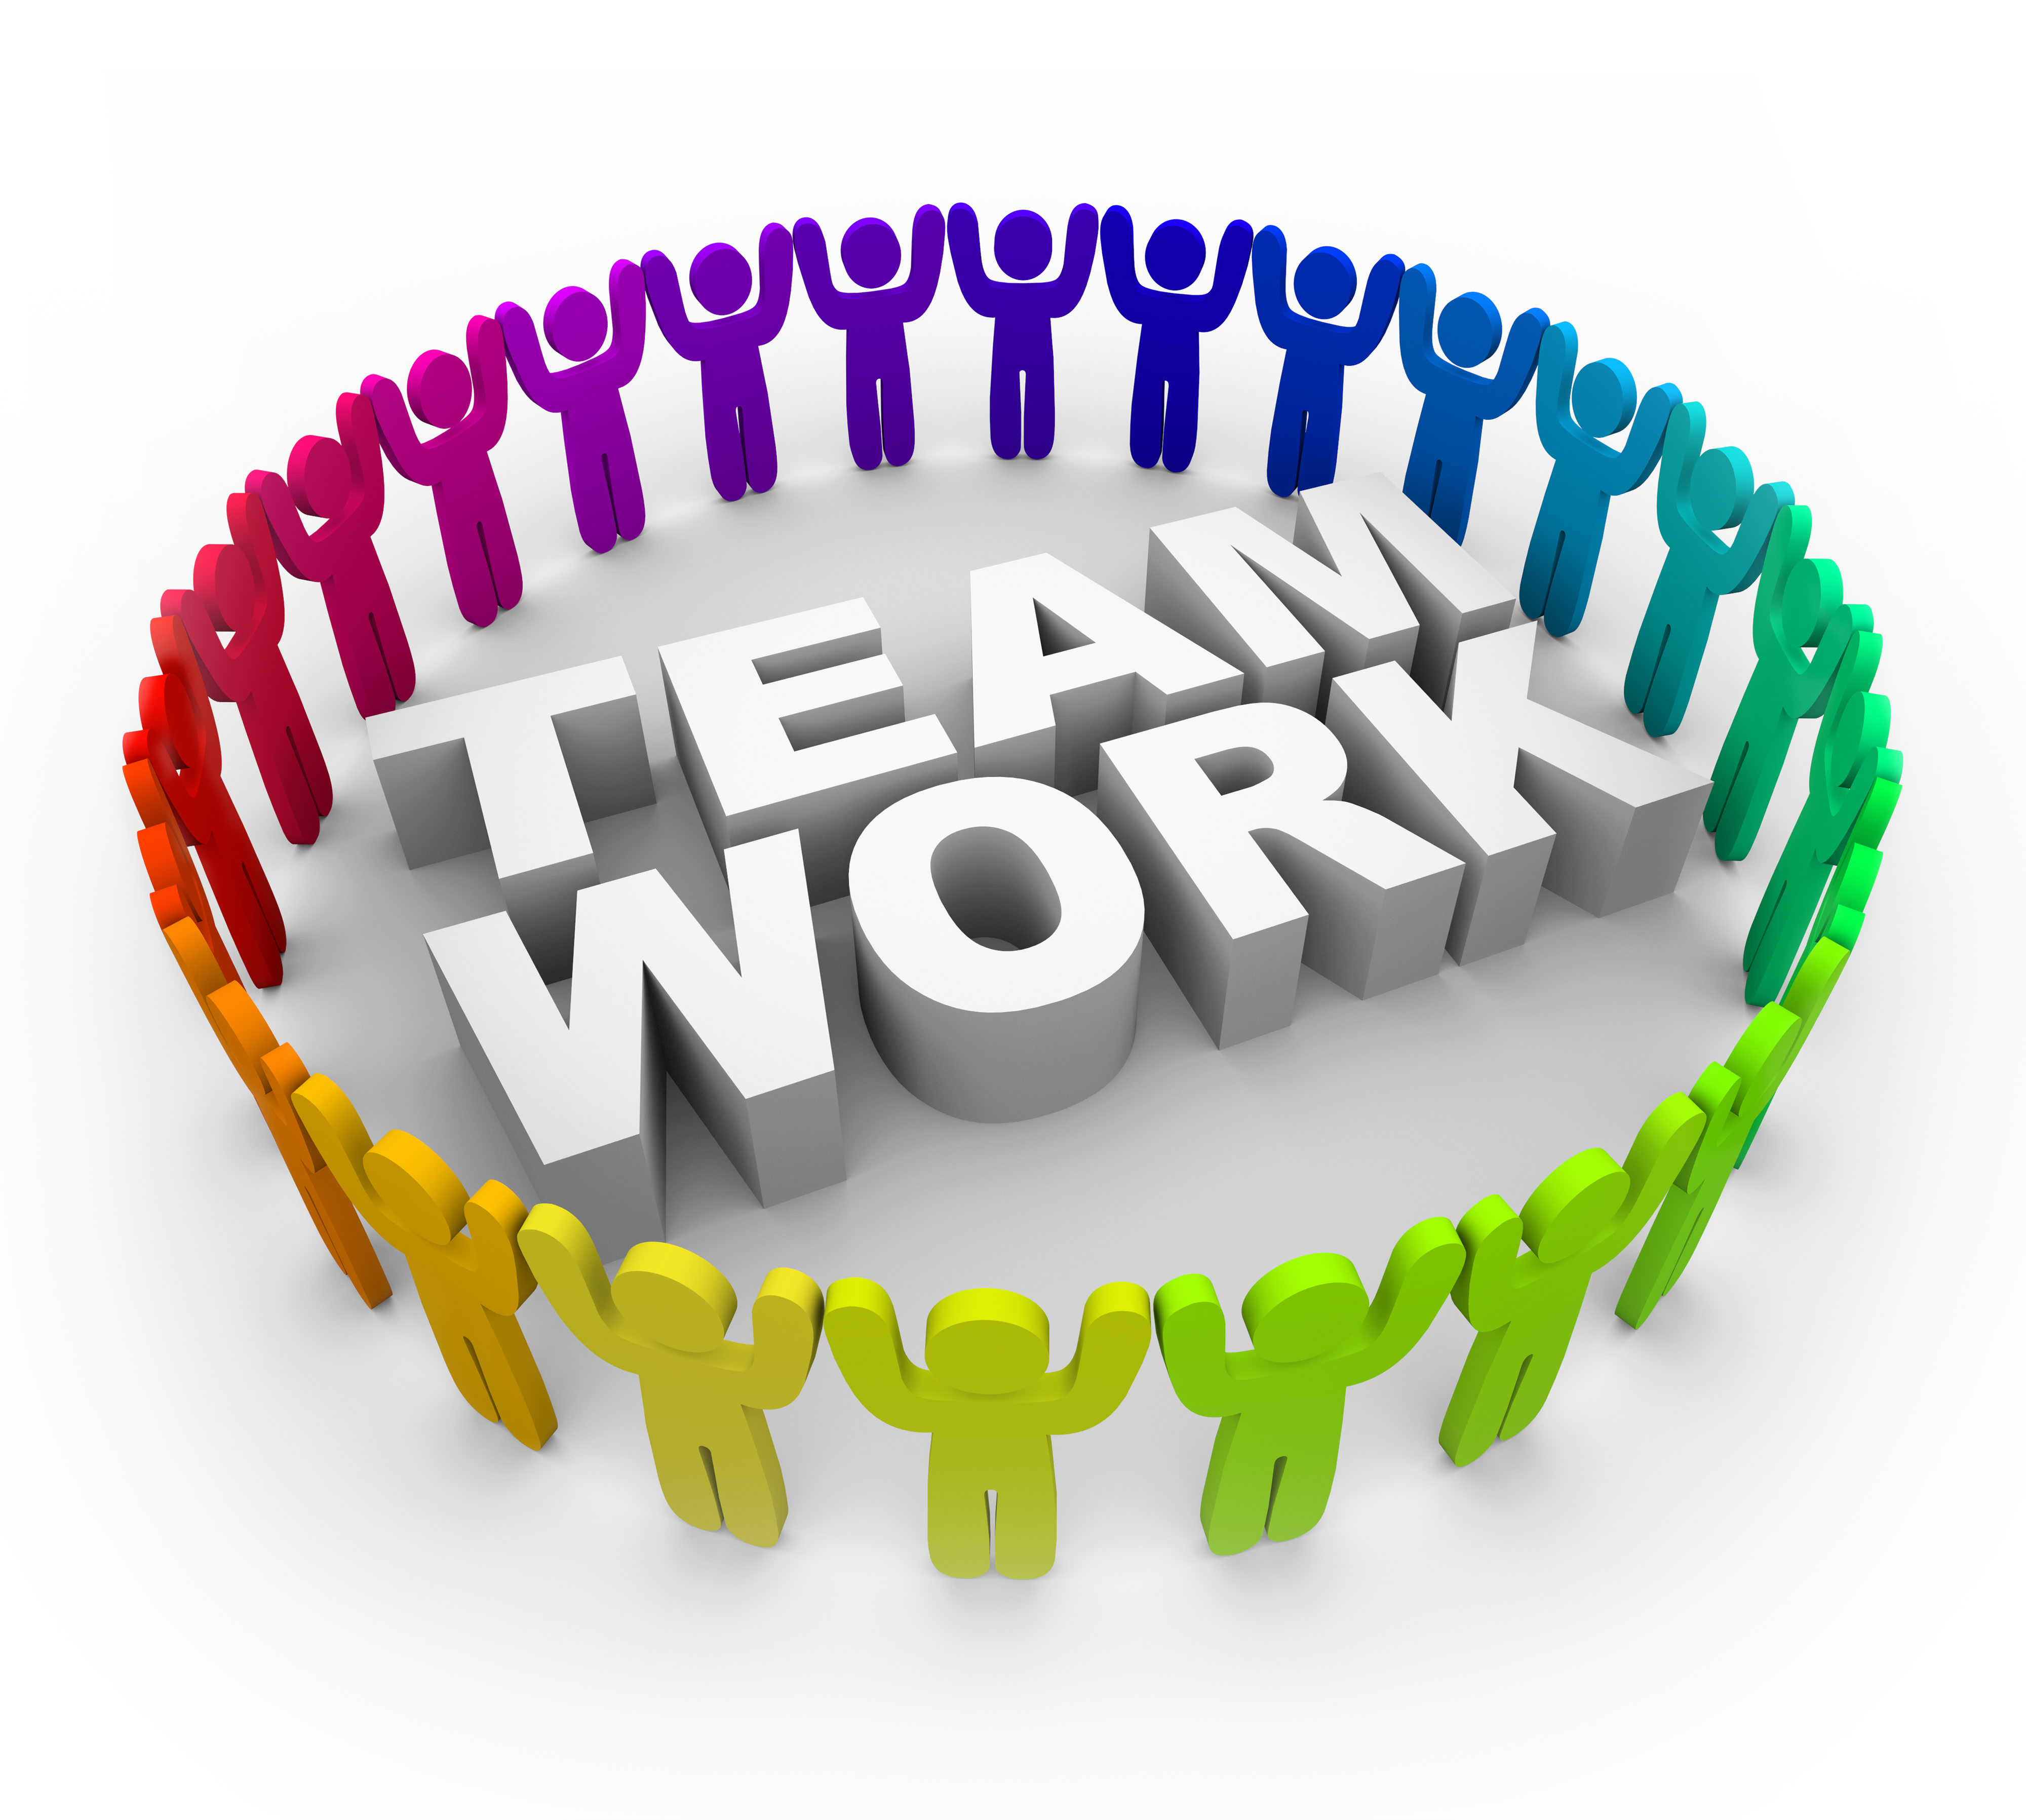 Free Teamwork Cliparts, Download Free Clip Art, Free Clip.